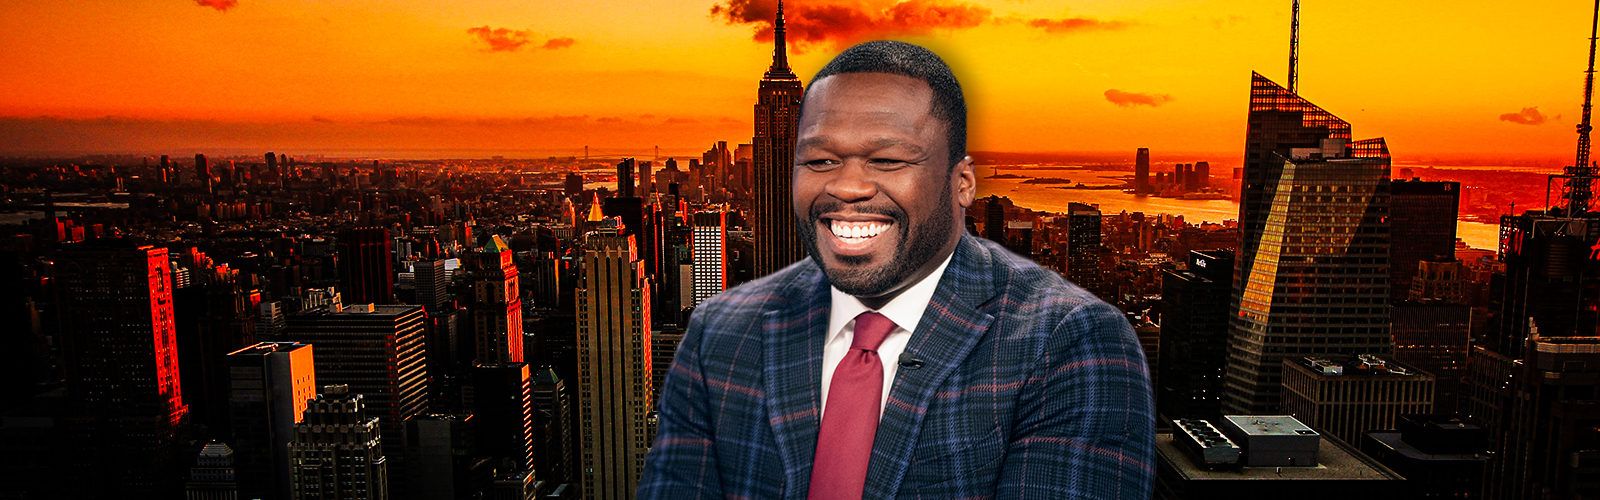 50 cent power force interview